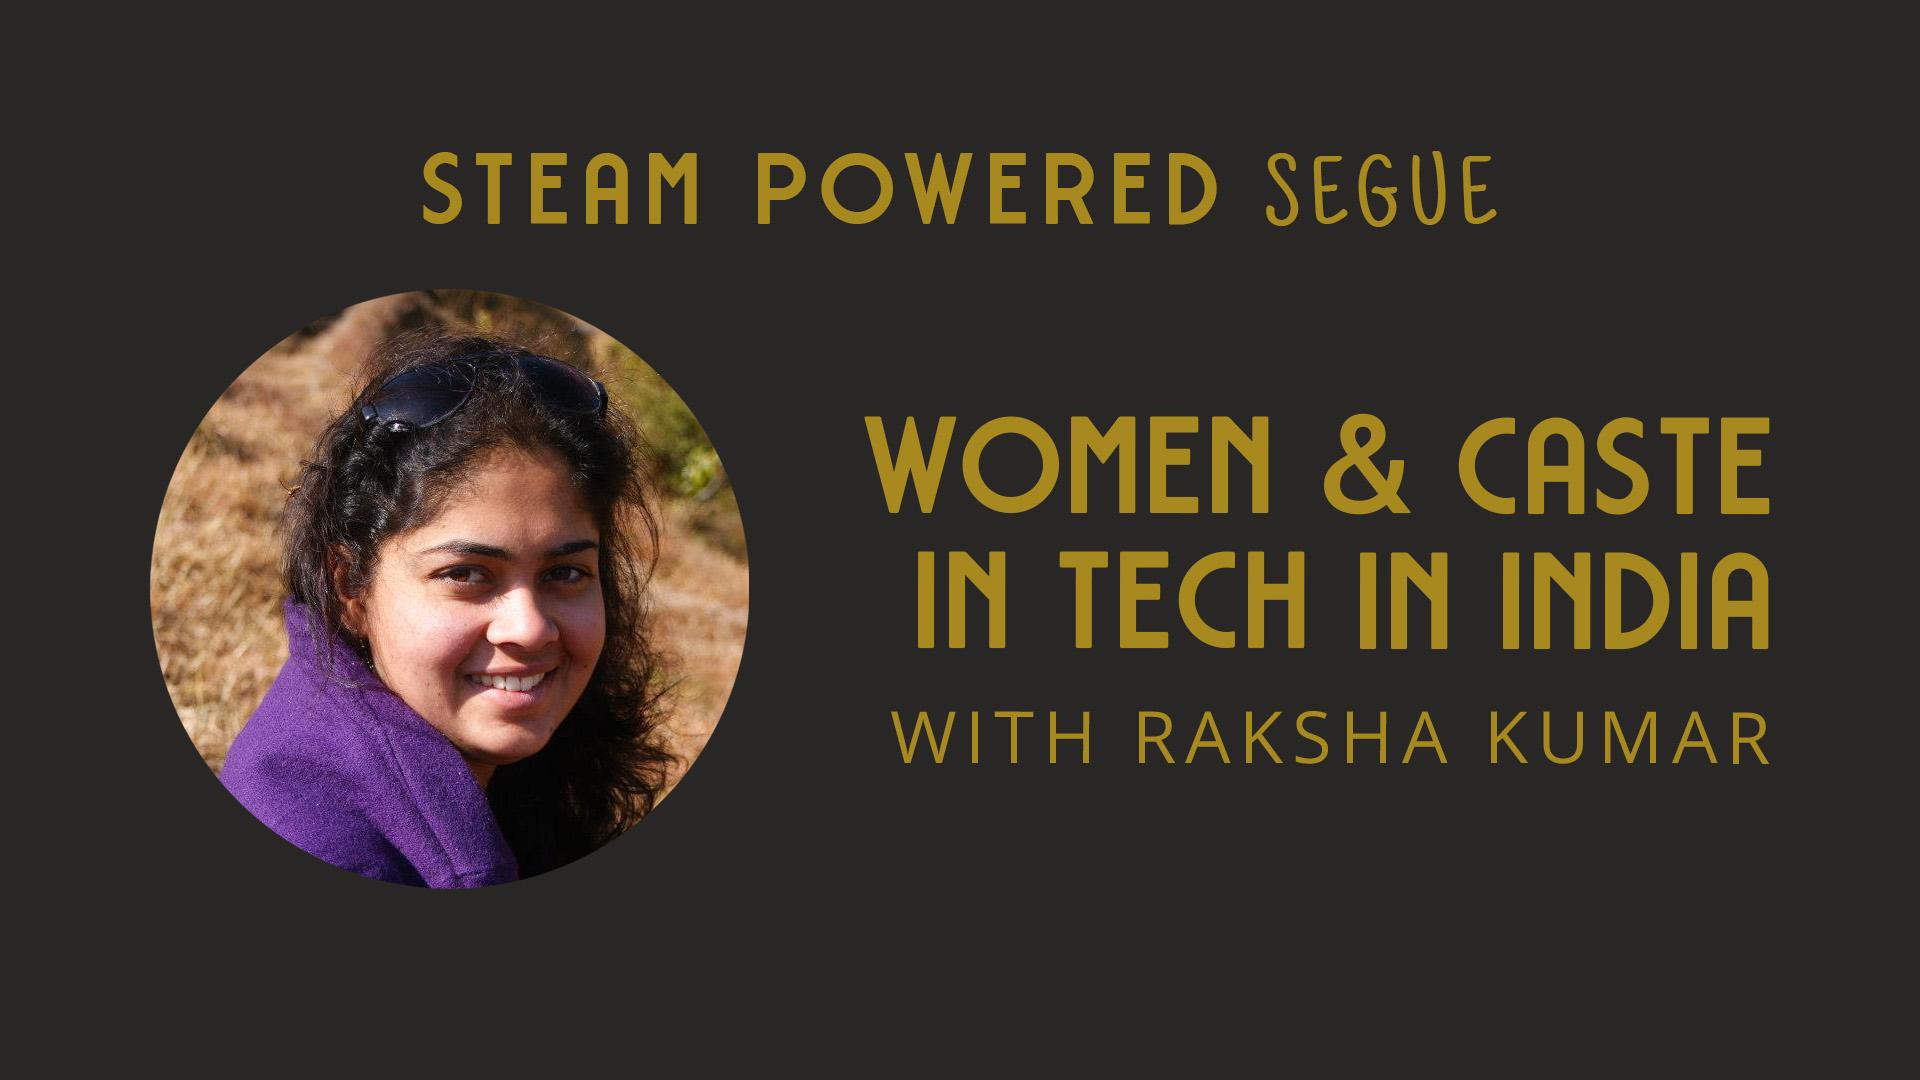 Women and caste in tech in India